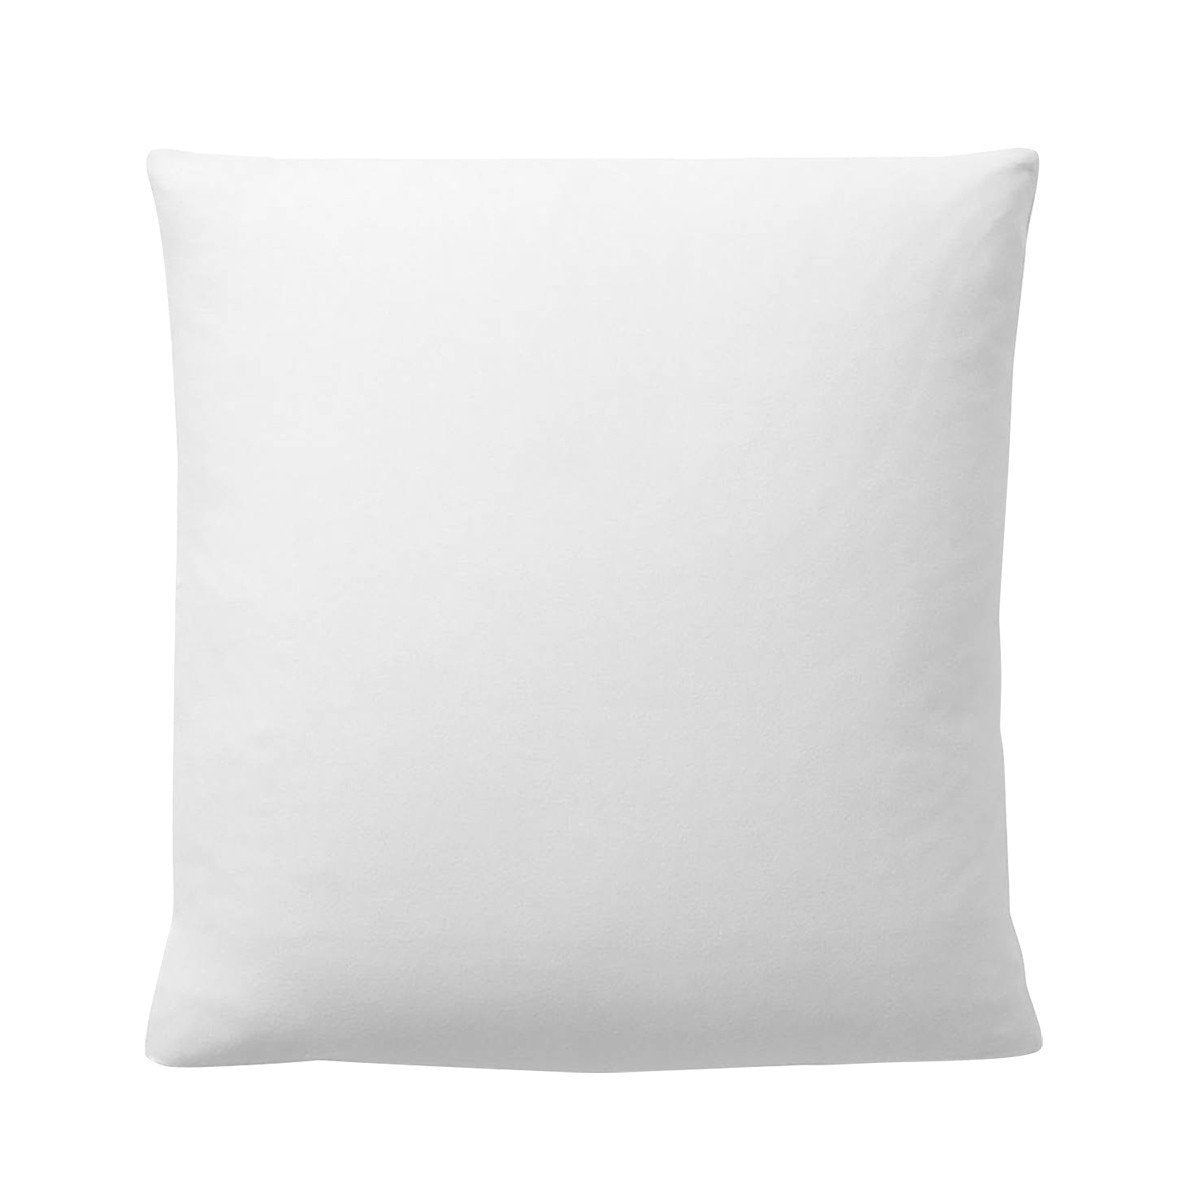 Silo of White Yves Delorme Pillow Protector against white background